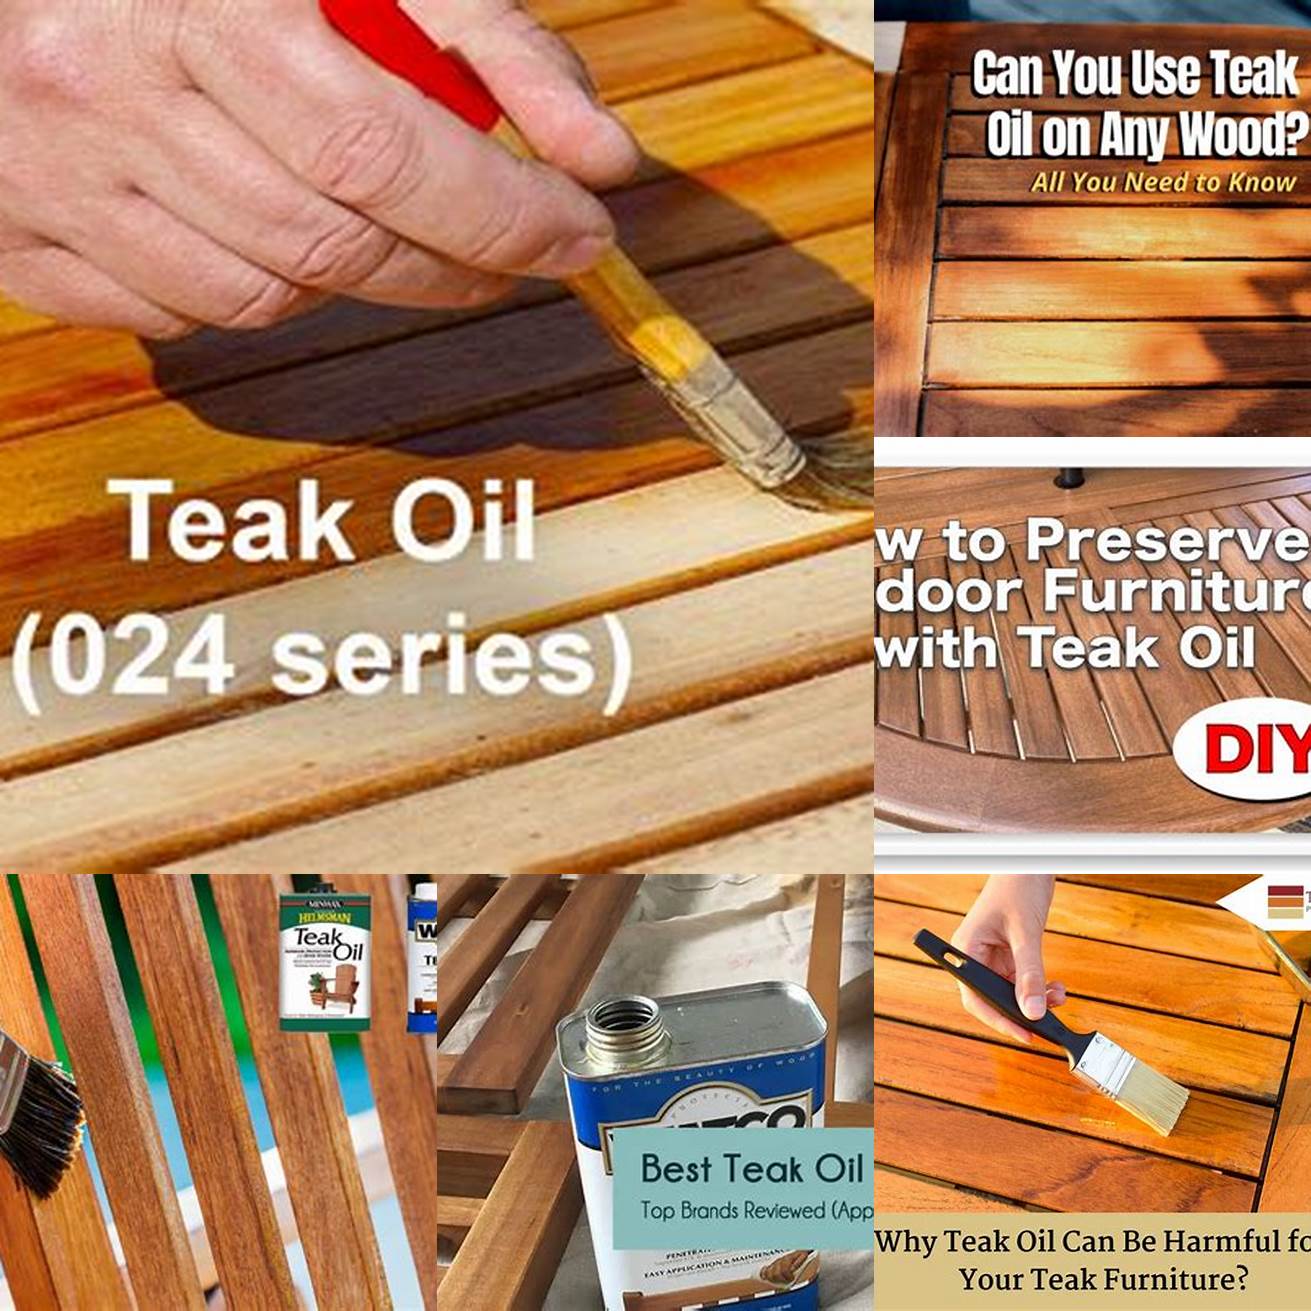 Apply teak oil once or twice a year